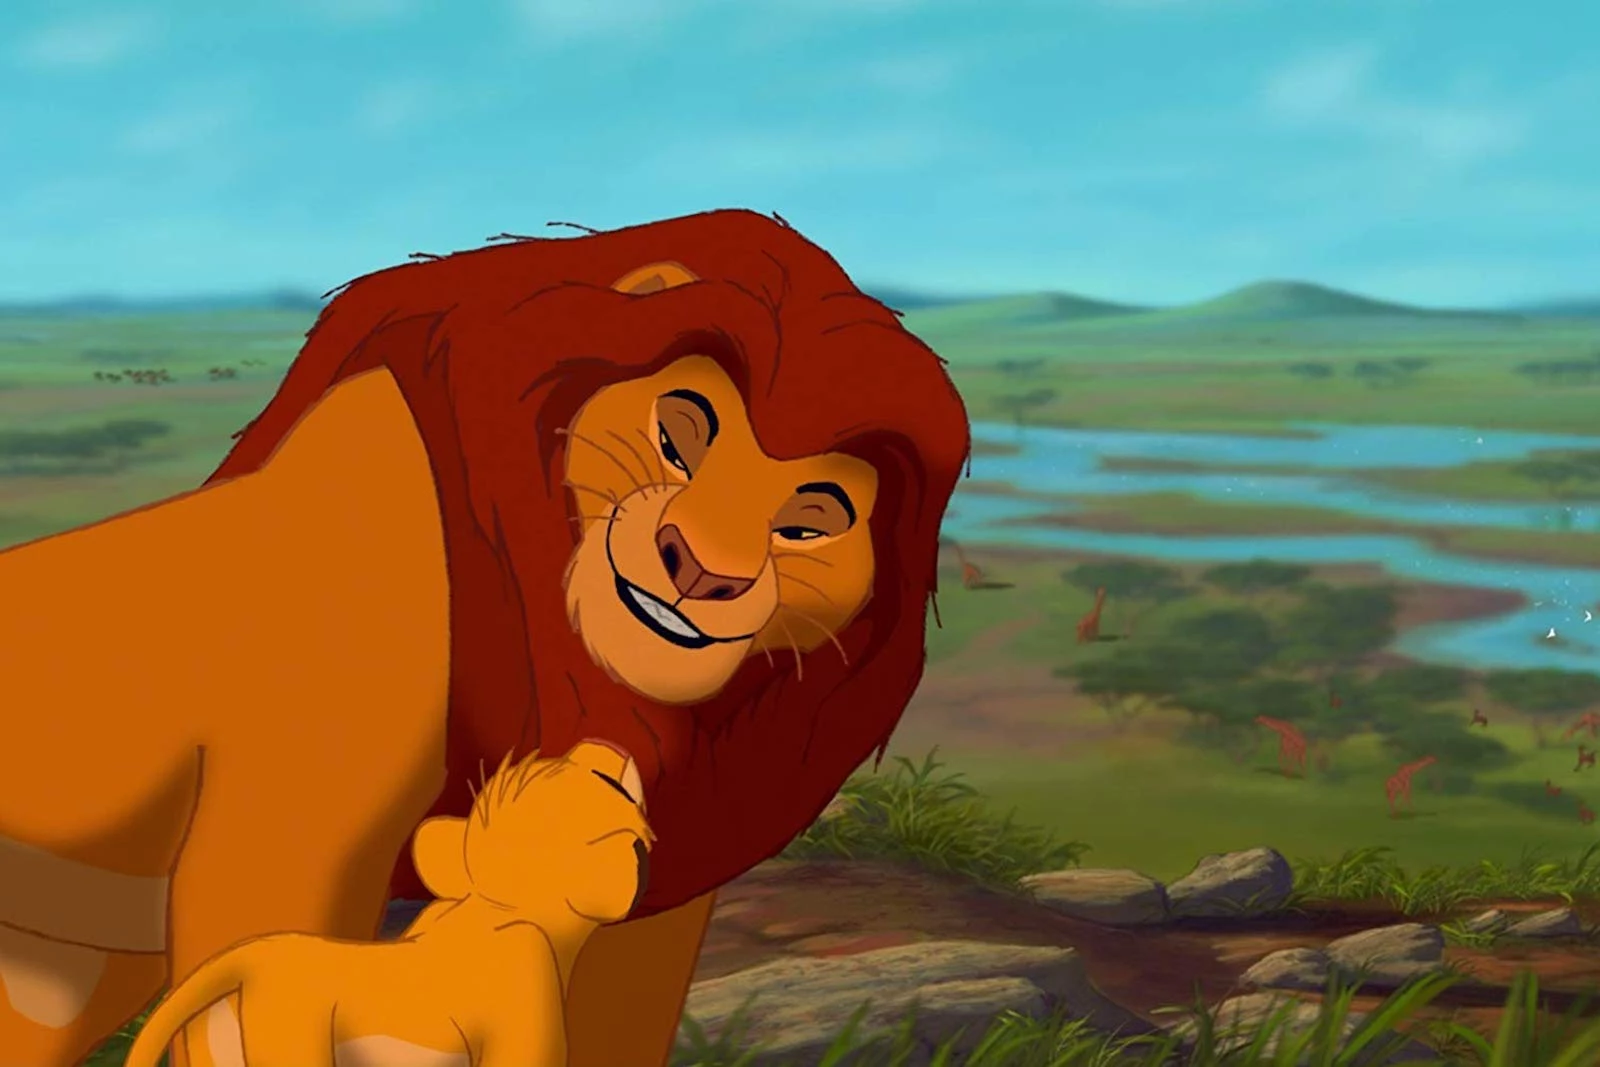 Actually, 'The Lion King'S Mufasa Was A Bad King